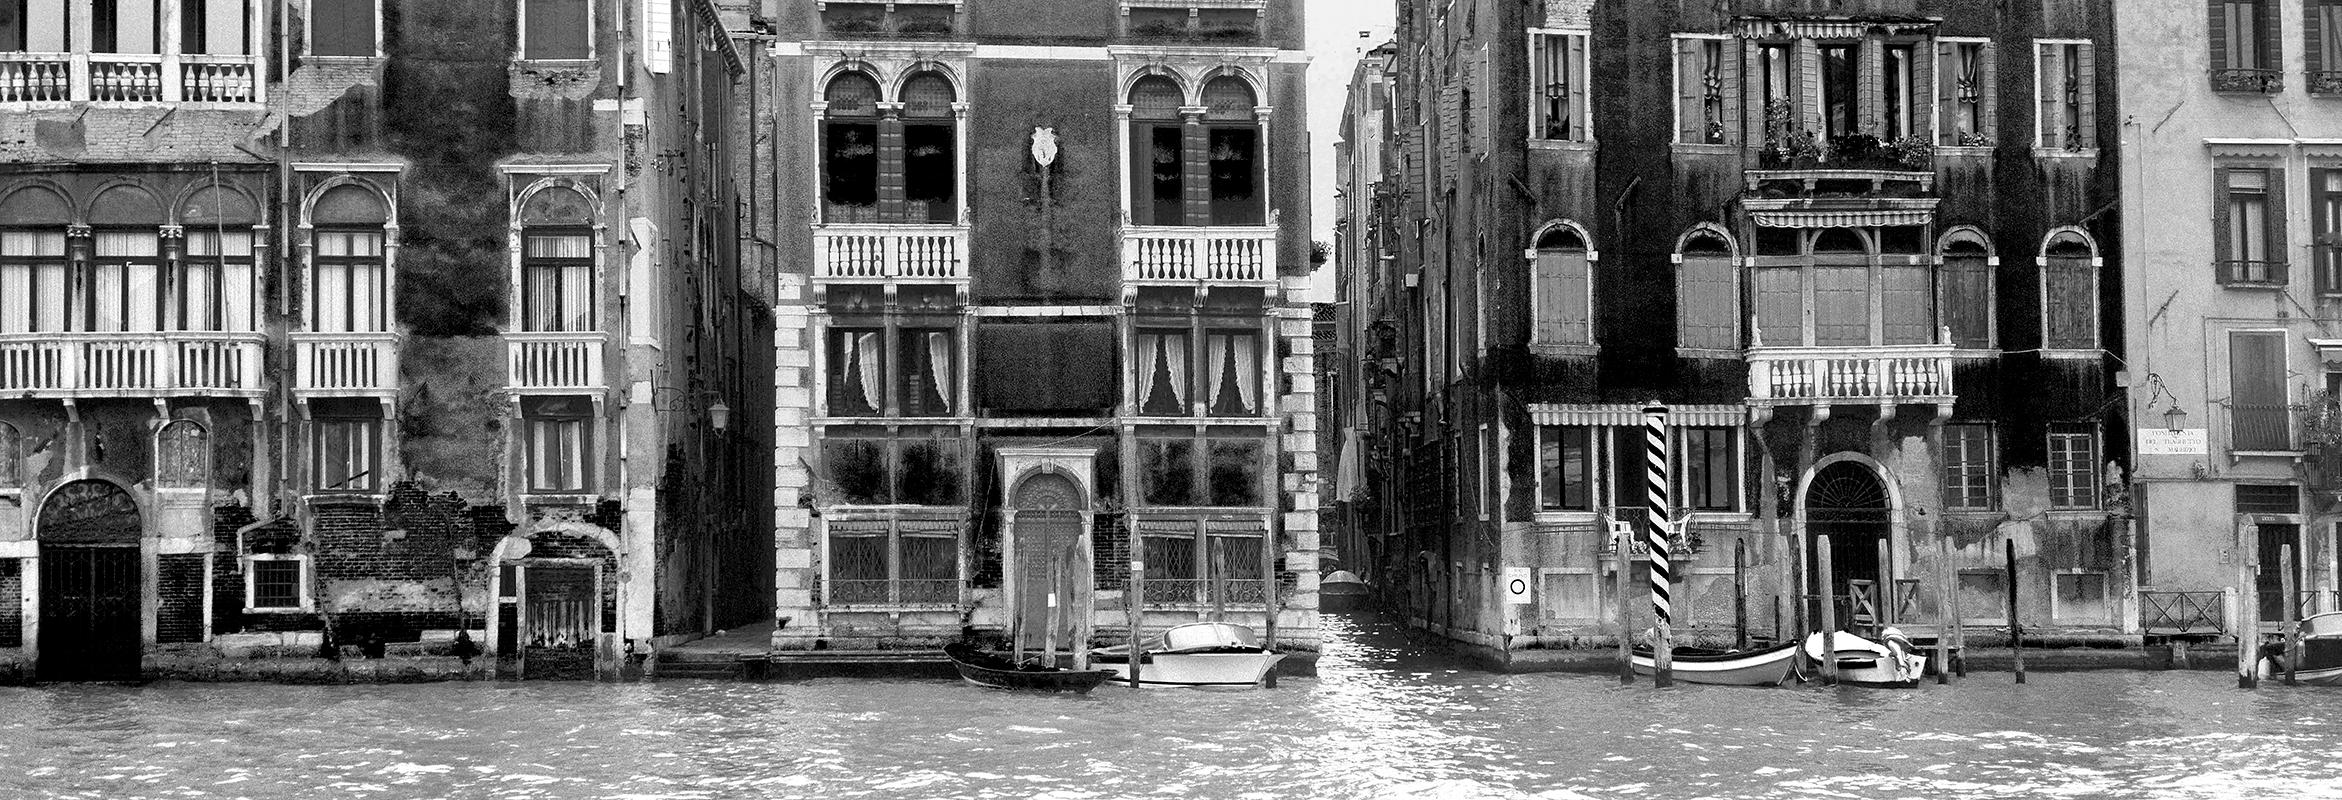 Ian Sanderson Black and White Photograph - Venice 2- Signed limited edition contemporary print, Black white photo, City Italy